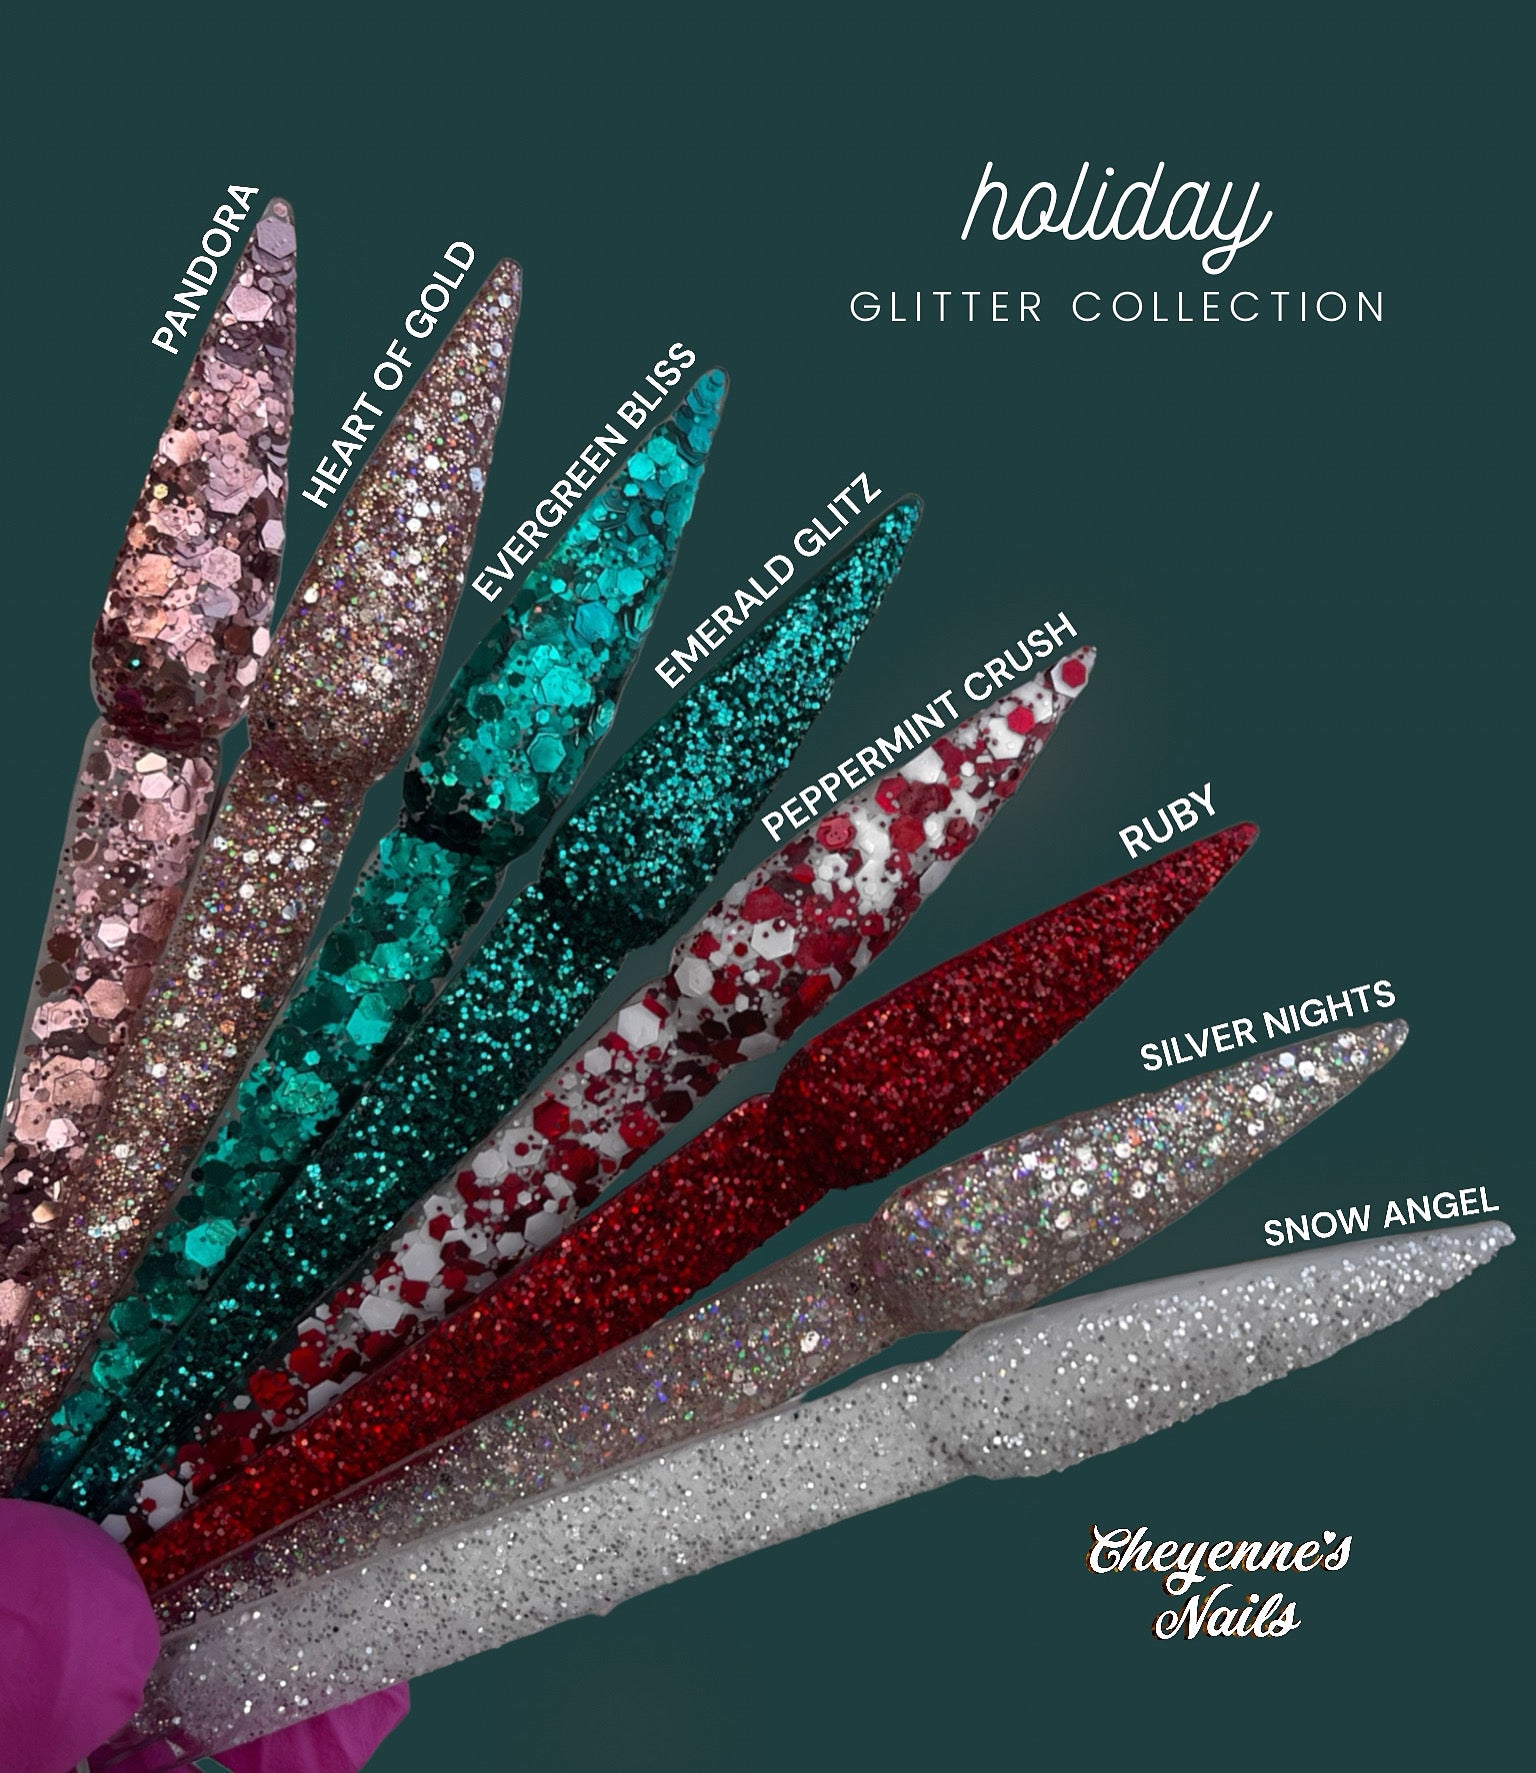 HOLIDAY GLITTER COLLECTION